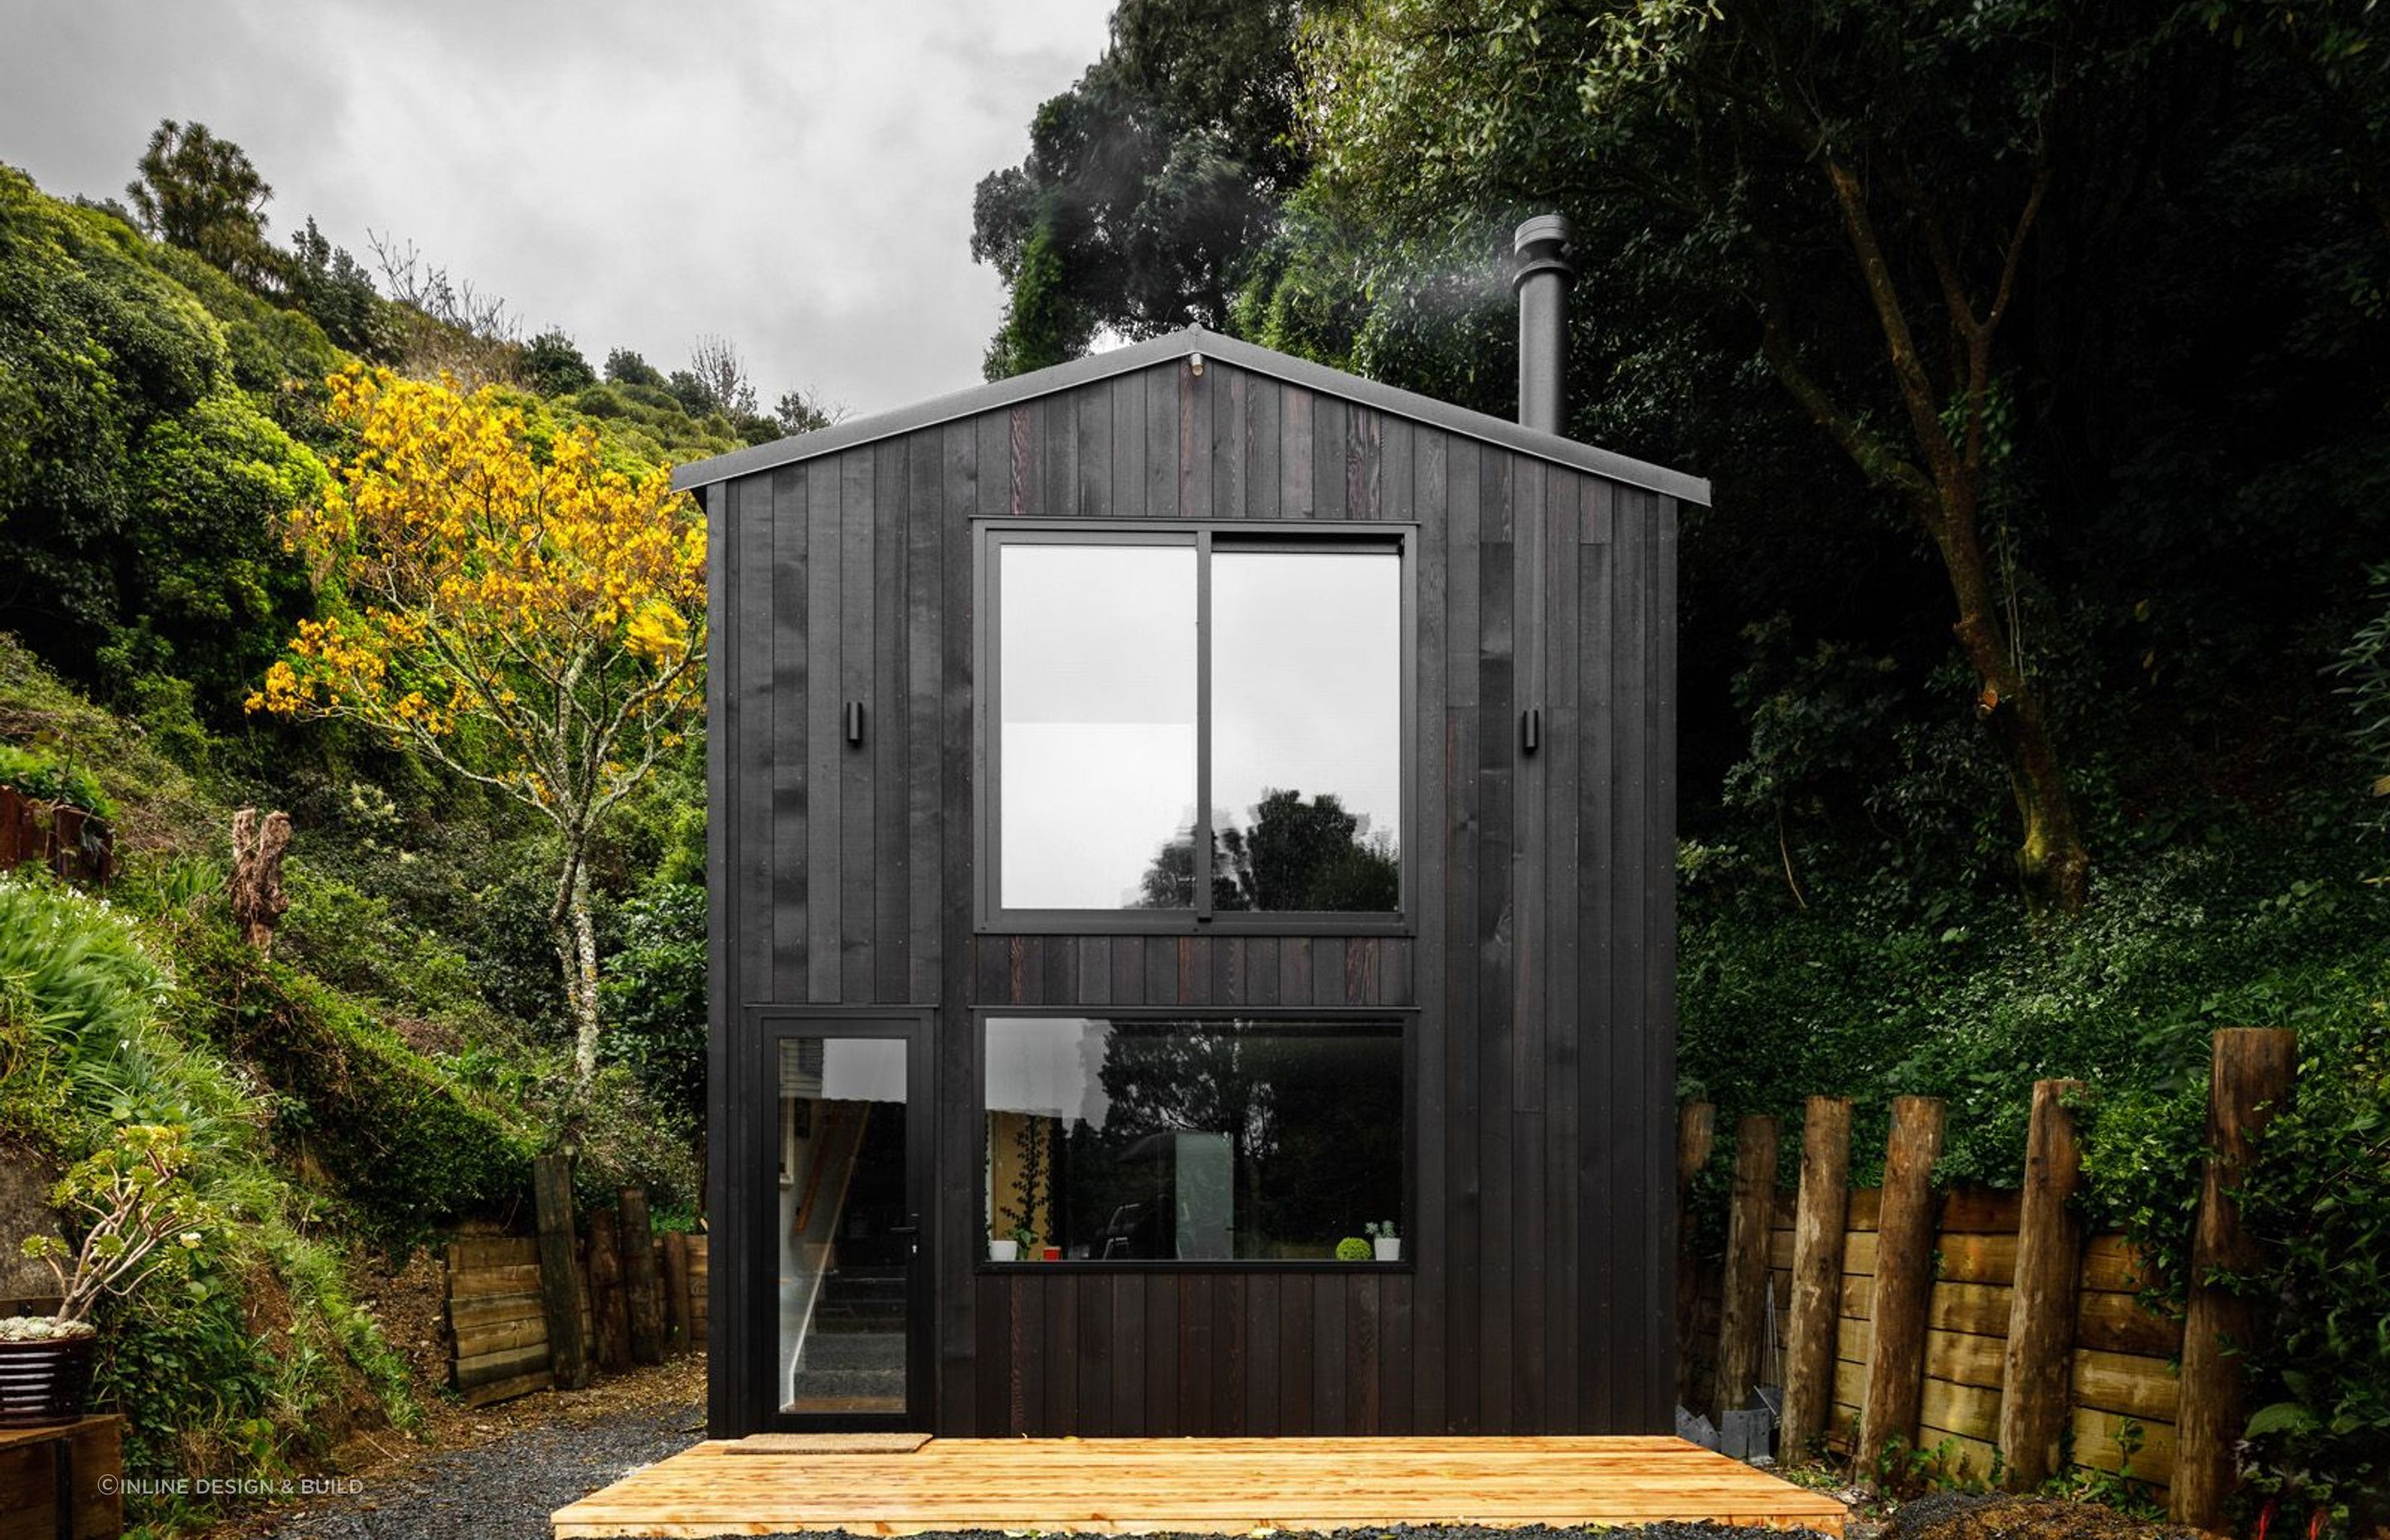 Tiny homes come in all shapes and sizes as this innovative gable-form tiny house in Vogeltown demonstrates with aplomb